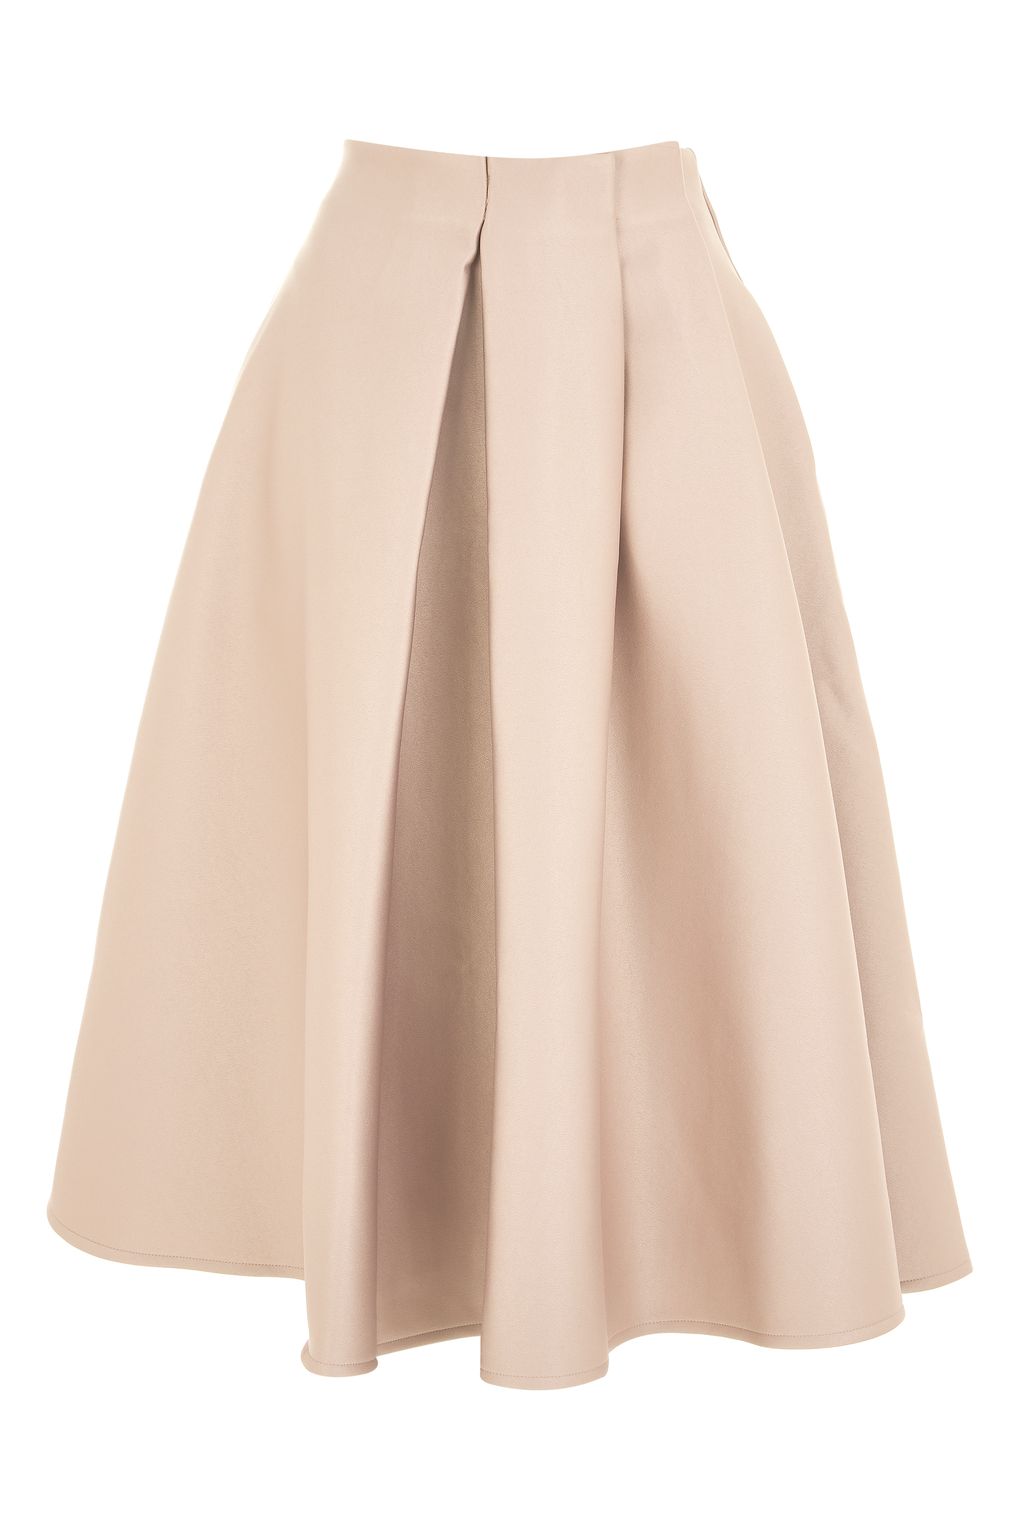 Topshop Pleat Front Prom Skirt